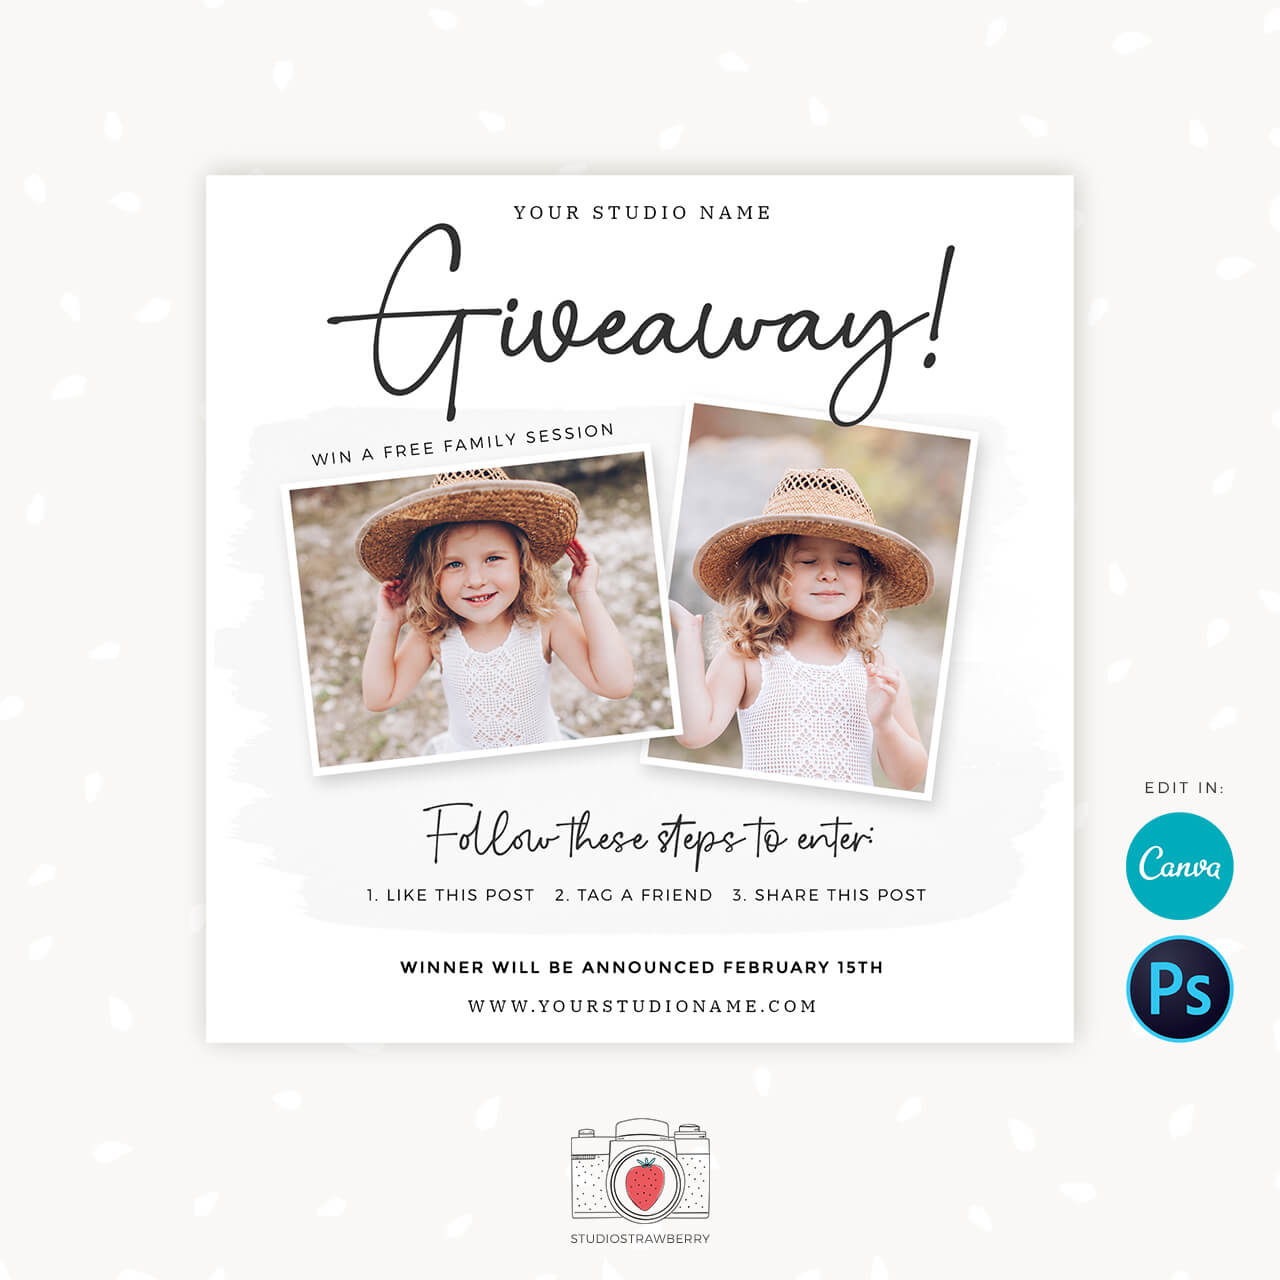 Giveaway contest canva template